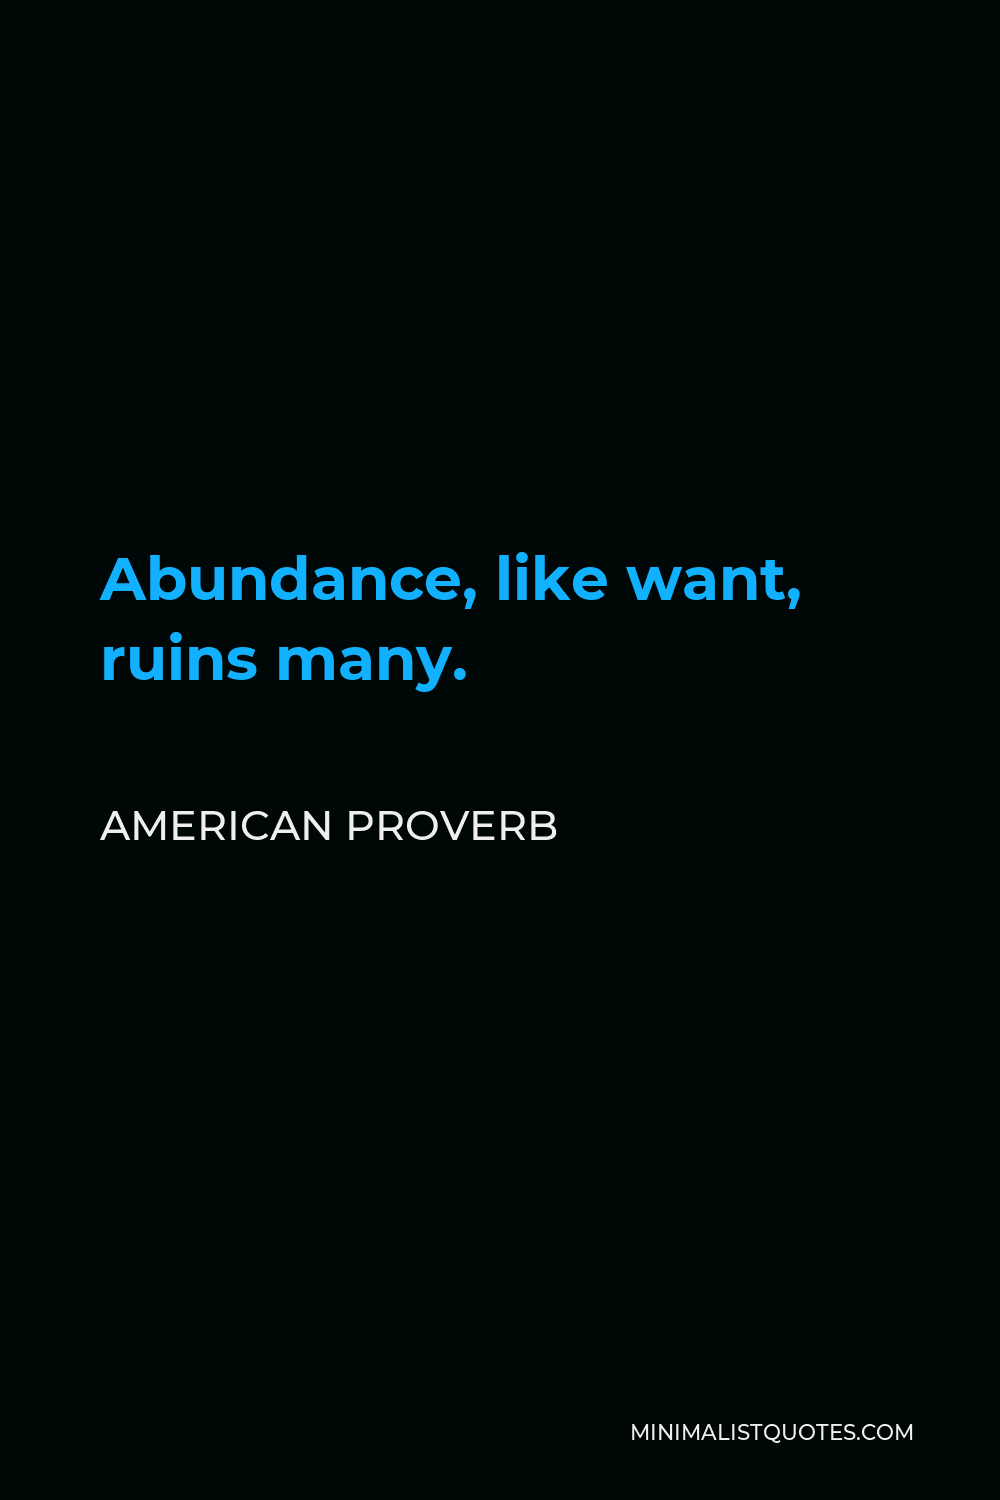 American Proverb Quote - Abundance, like want, ruins many.